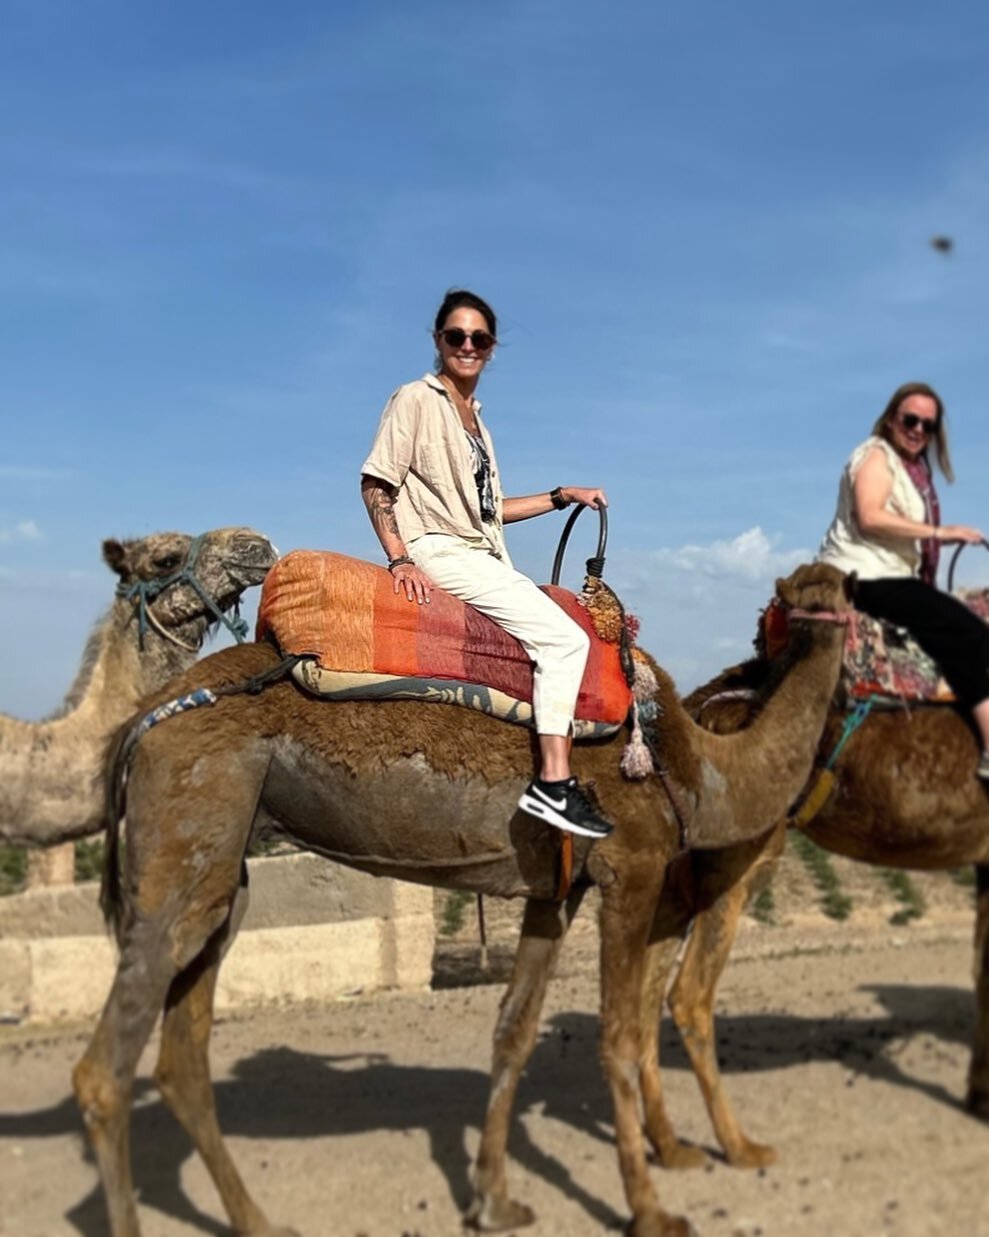 Just back from Morocco and story highlights are up! 🇲🇦 

It was a whirlwind week of beautiful sites, sounds and flavors.  We totally fell in love with Morocco and know you will too! 💕 
#agafaydesert #moroccotravel #northafrica